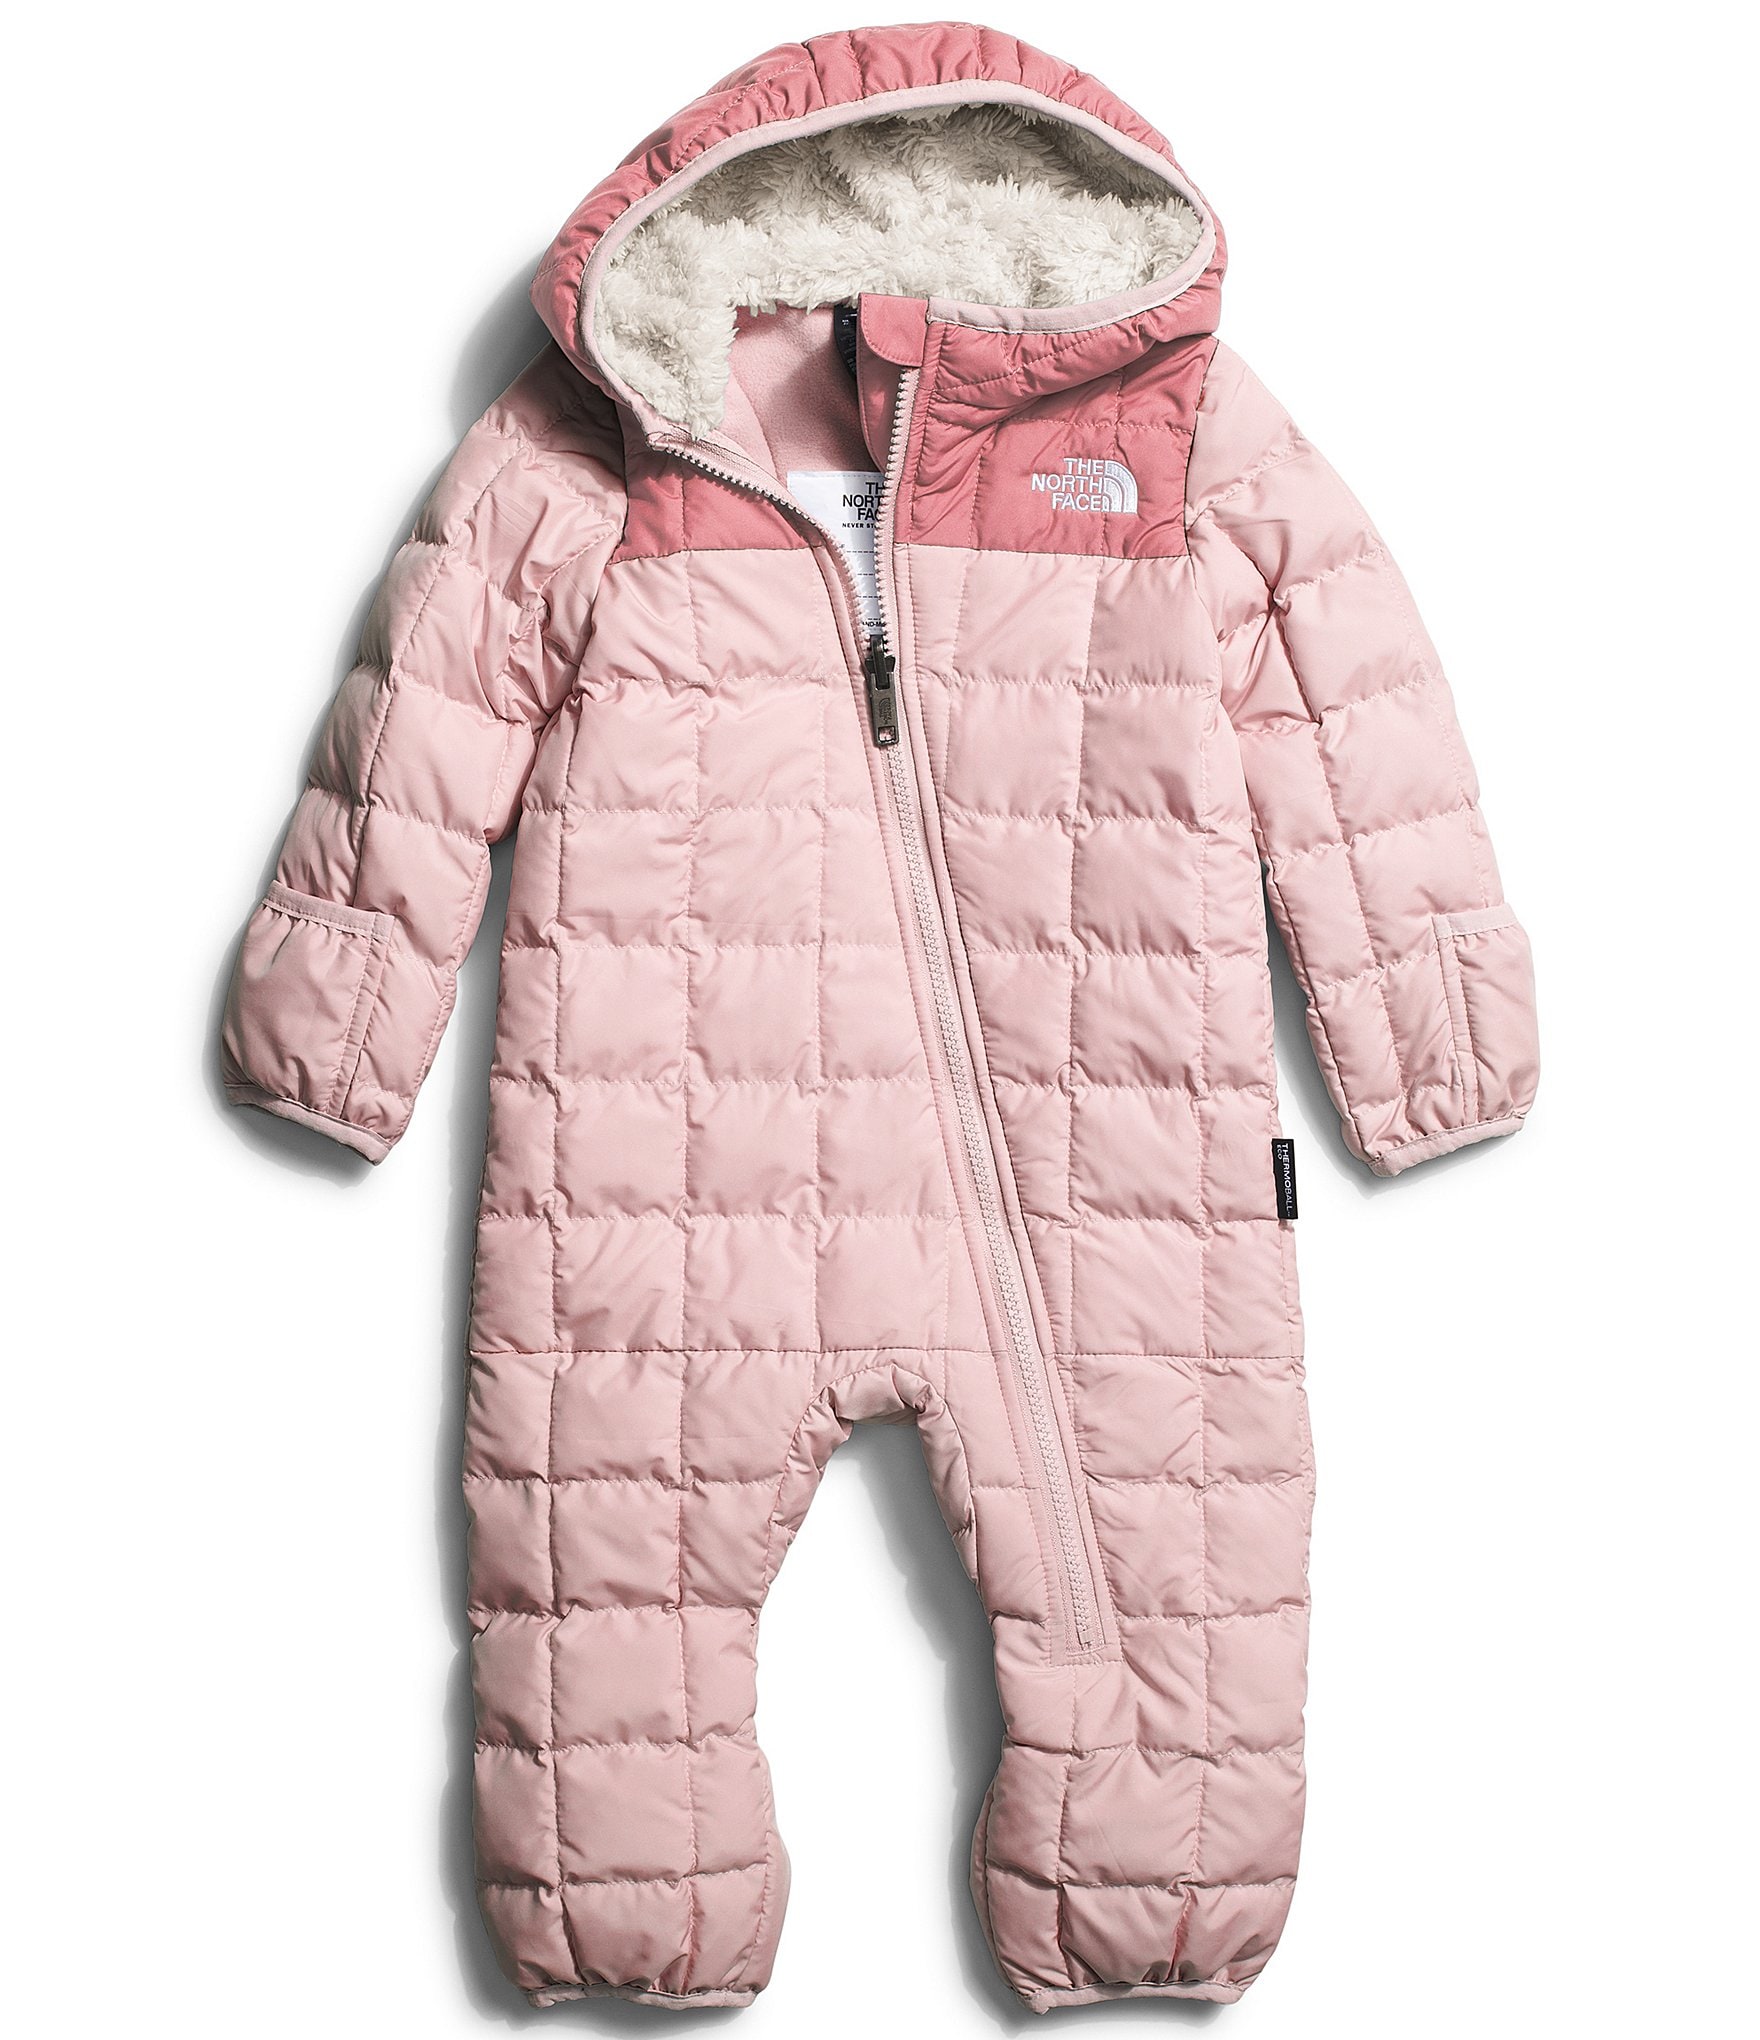 Deter Voorouder George Eliot The North Face Baby Girls 3-24 Months Thermoball One-Piece | Dillard's